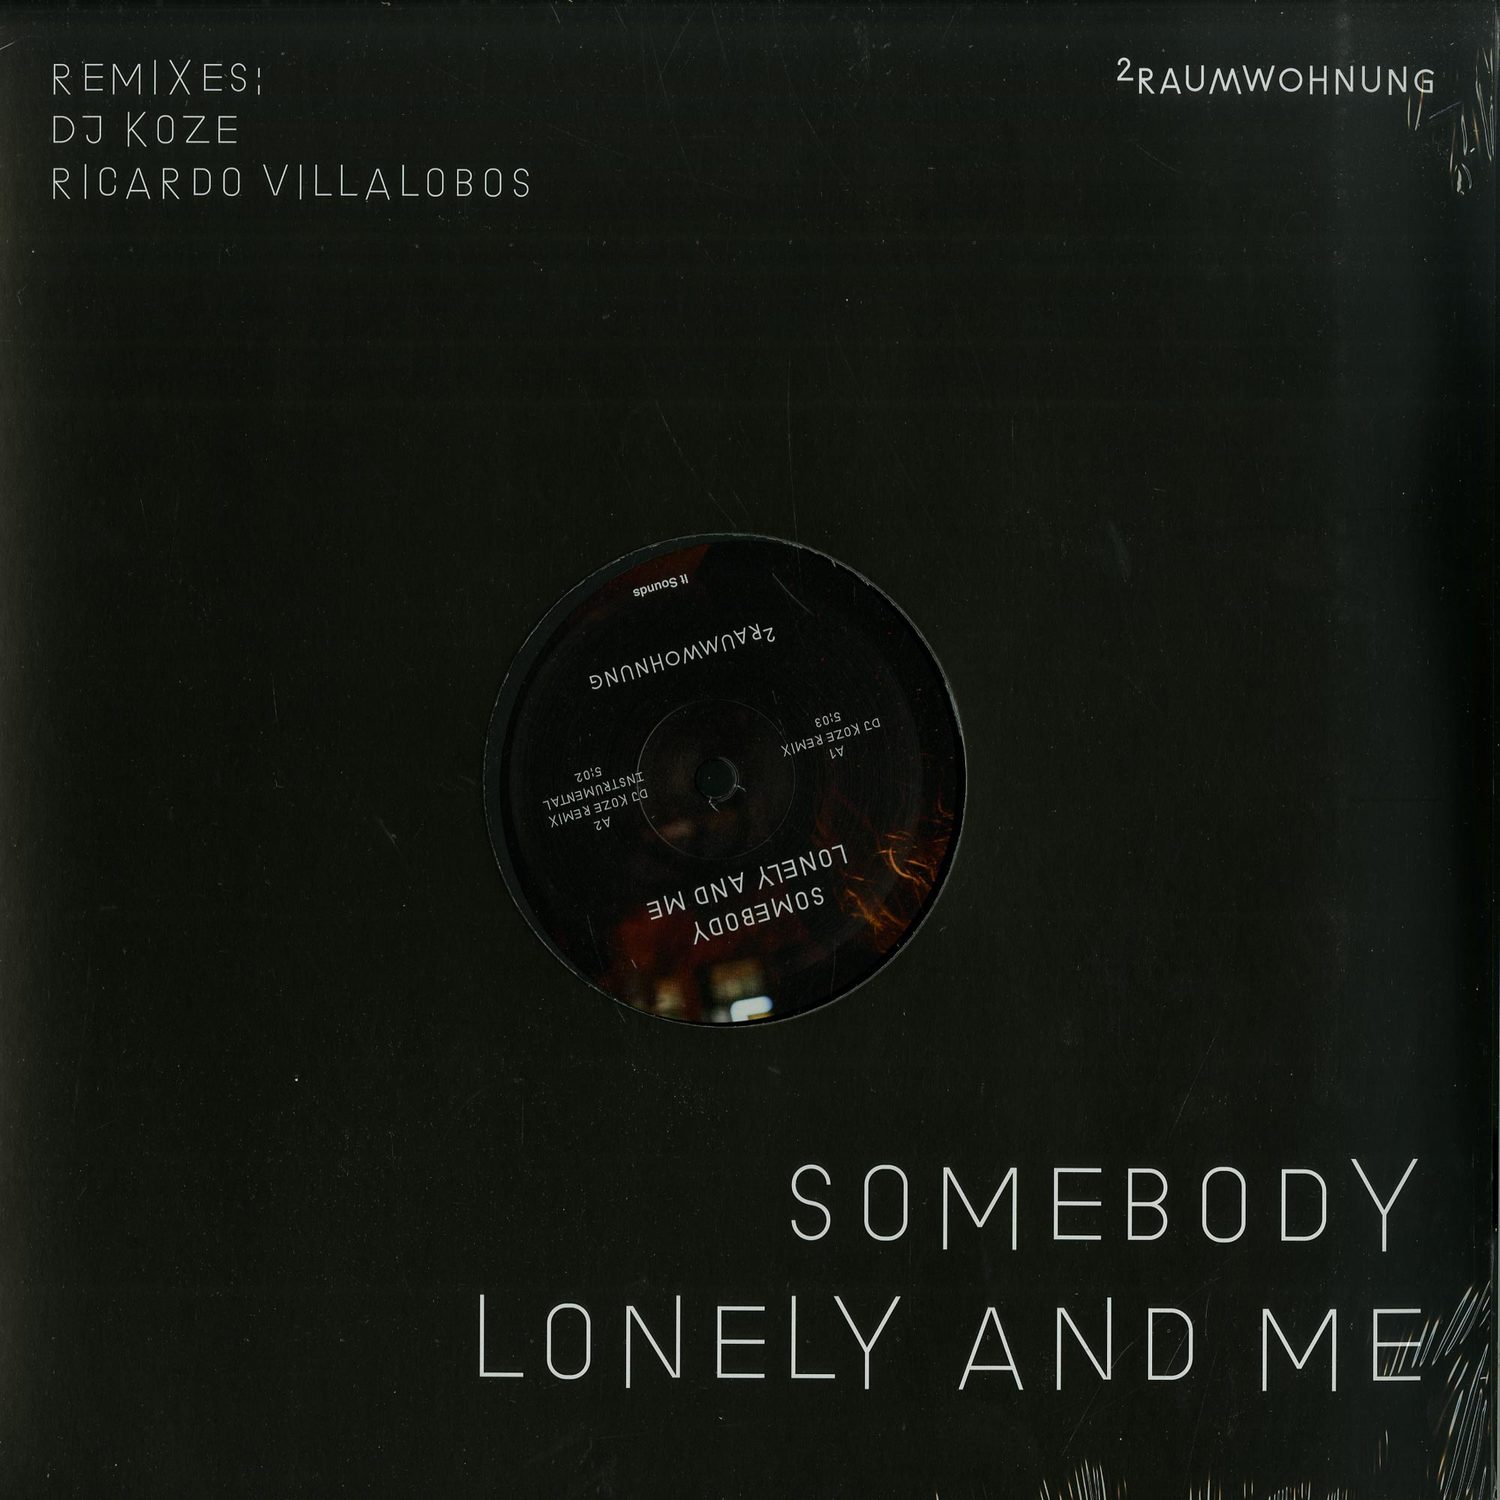 2Raumwohnung - SOMEBODY LONELY AND ME 